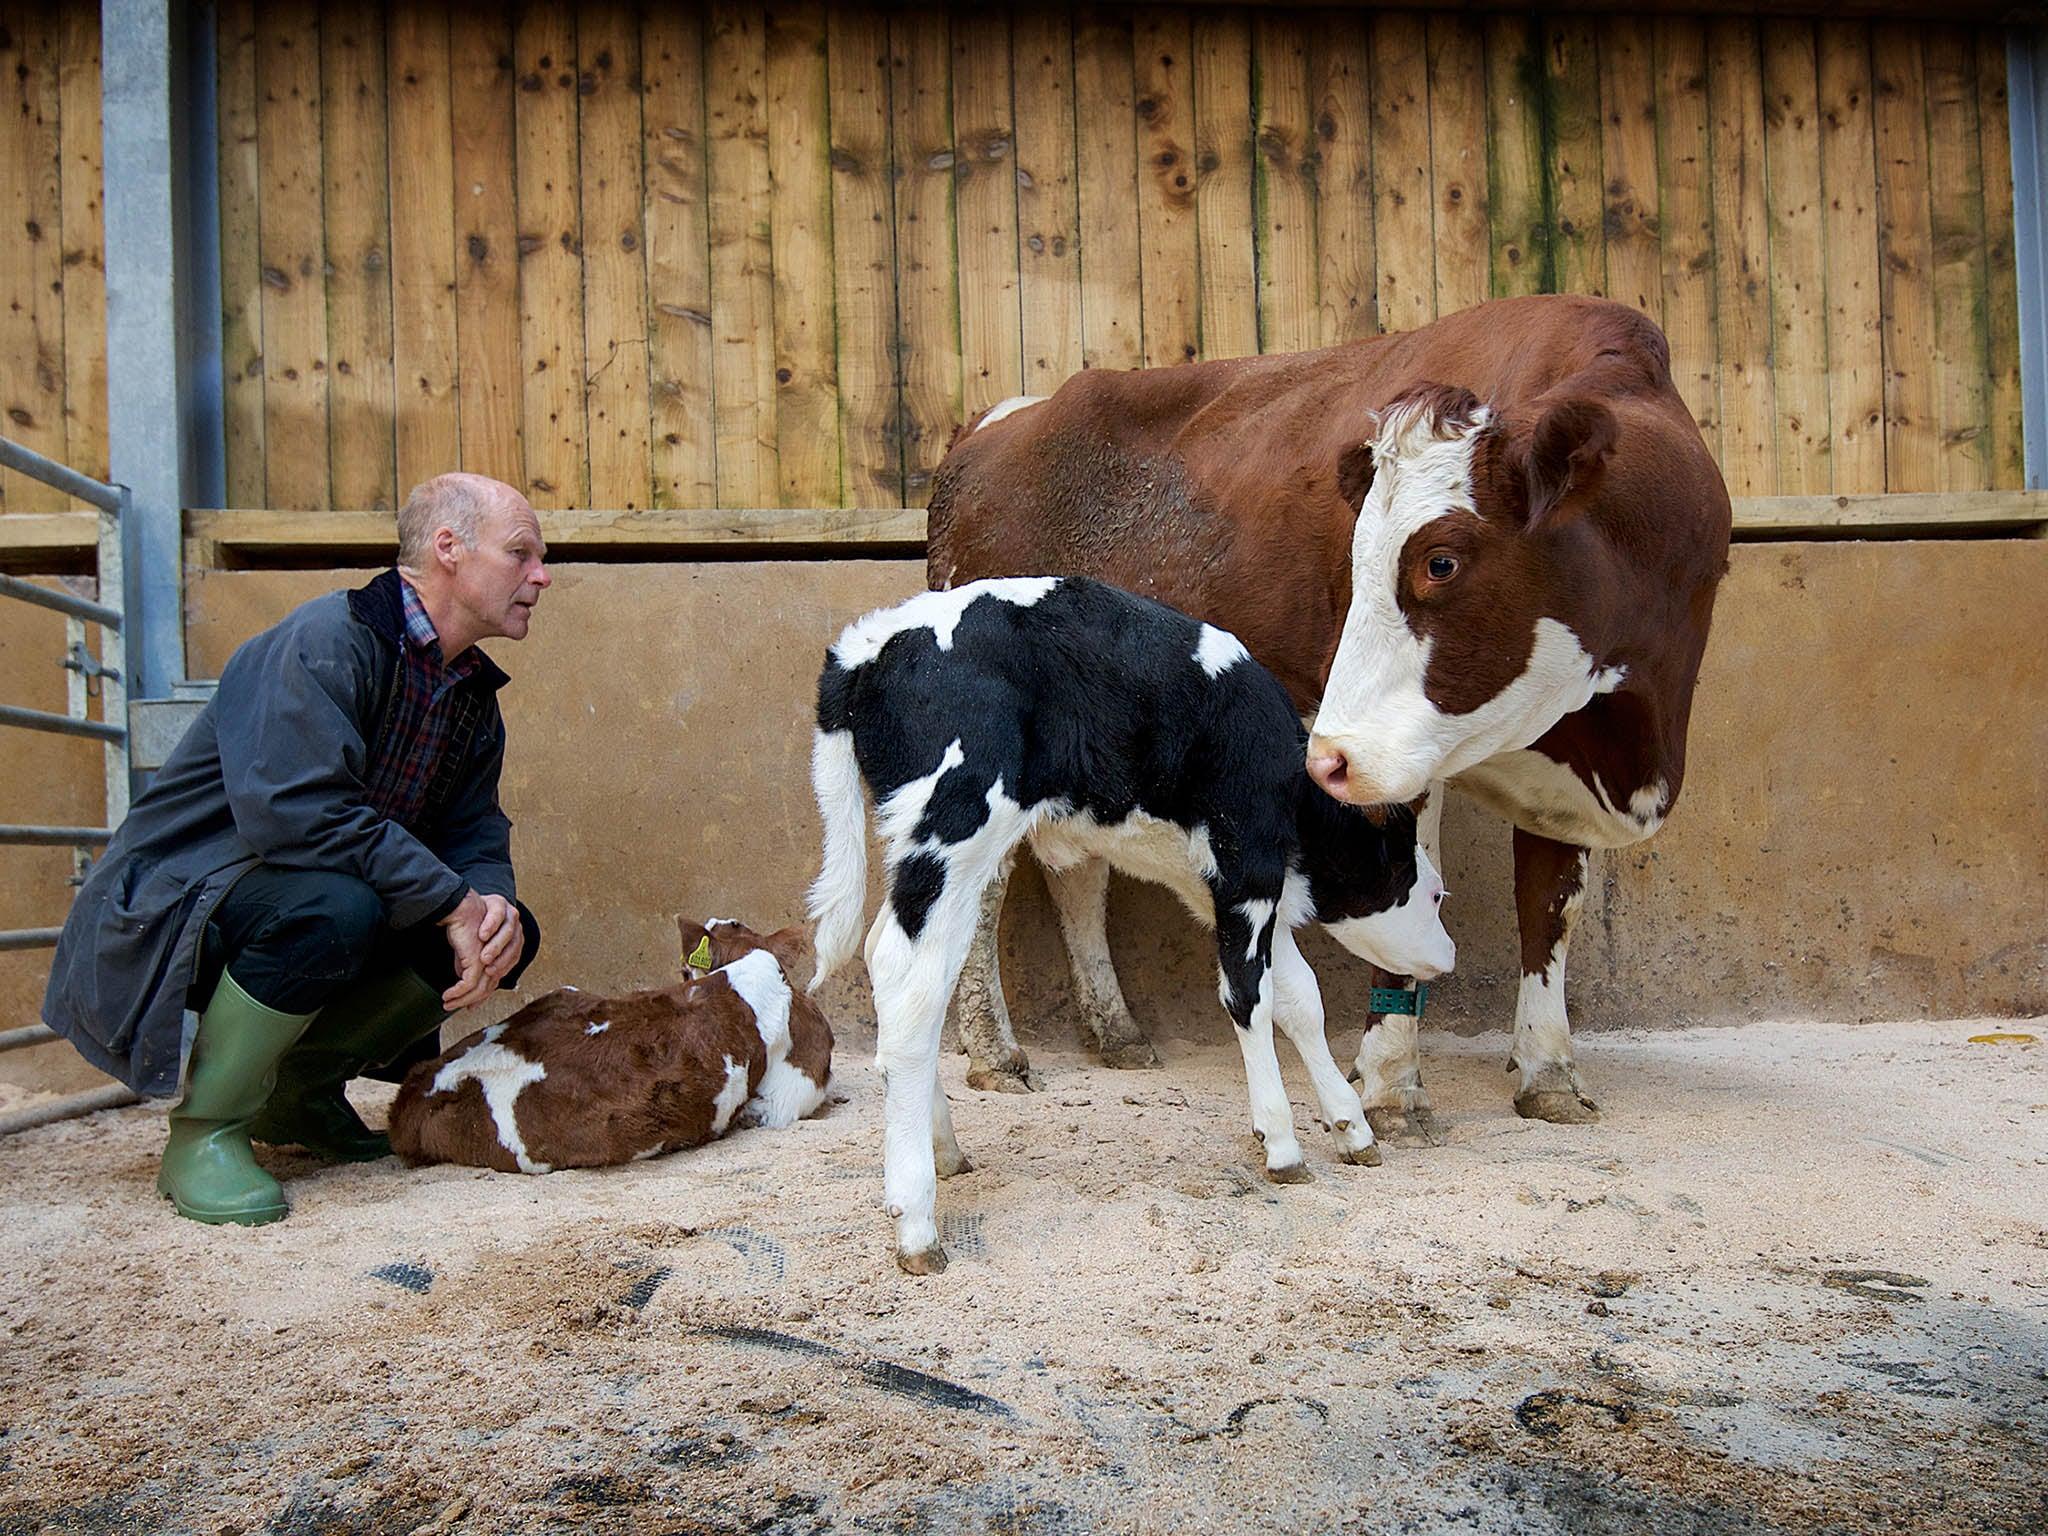 Meet the farmers on a mission to make ethical dairy products